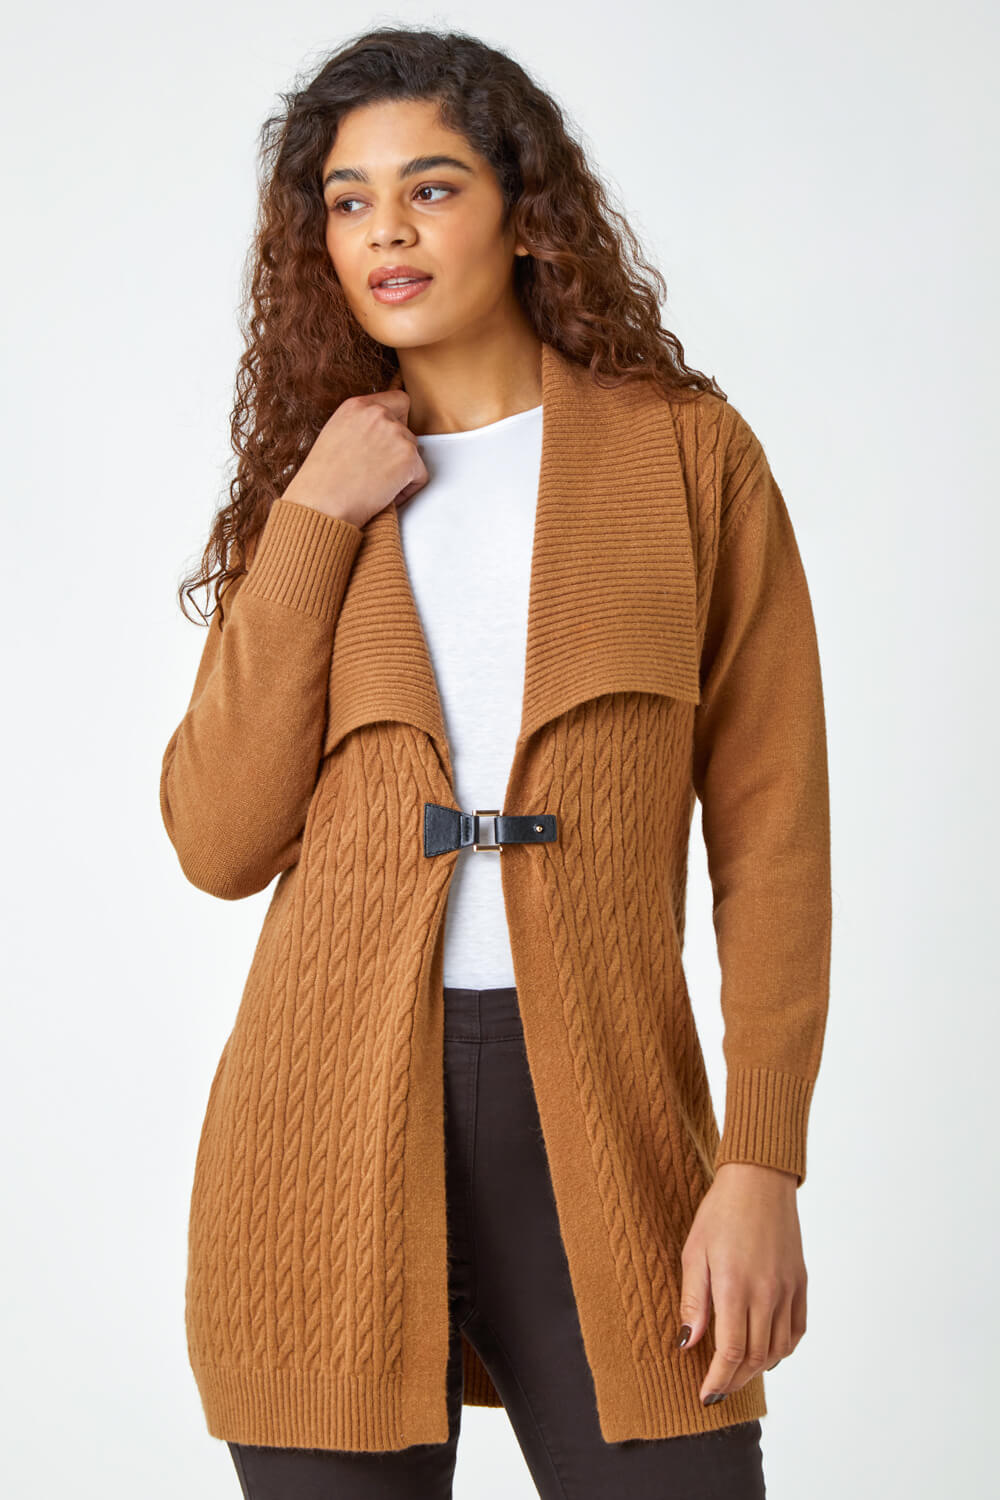 Mocha Collared Cable Knit Cardigan, Image 4 of 5